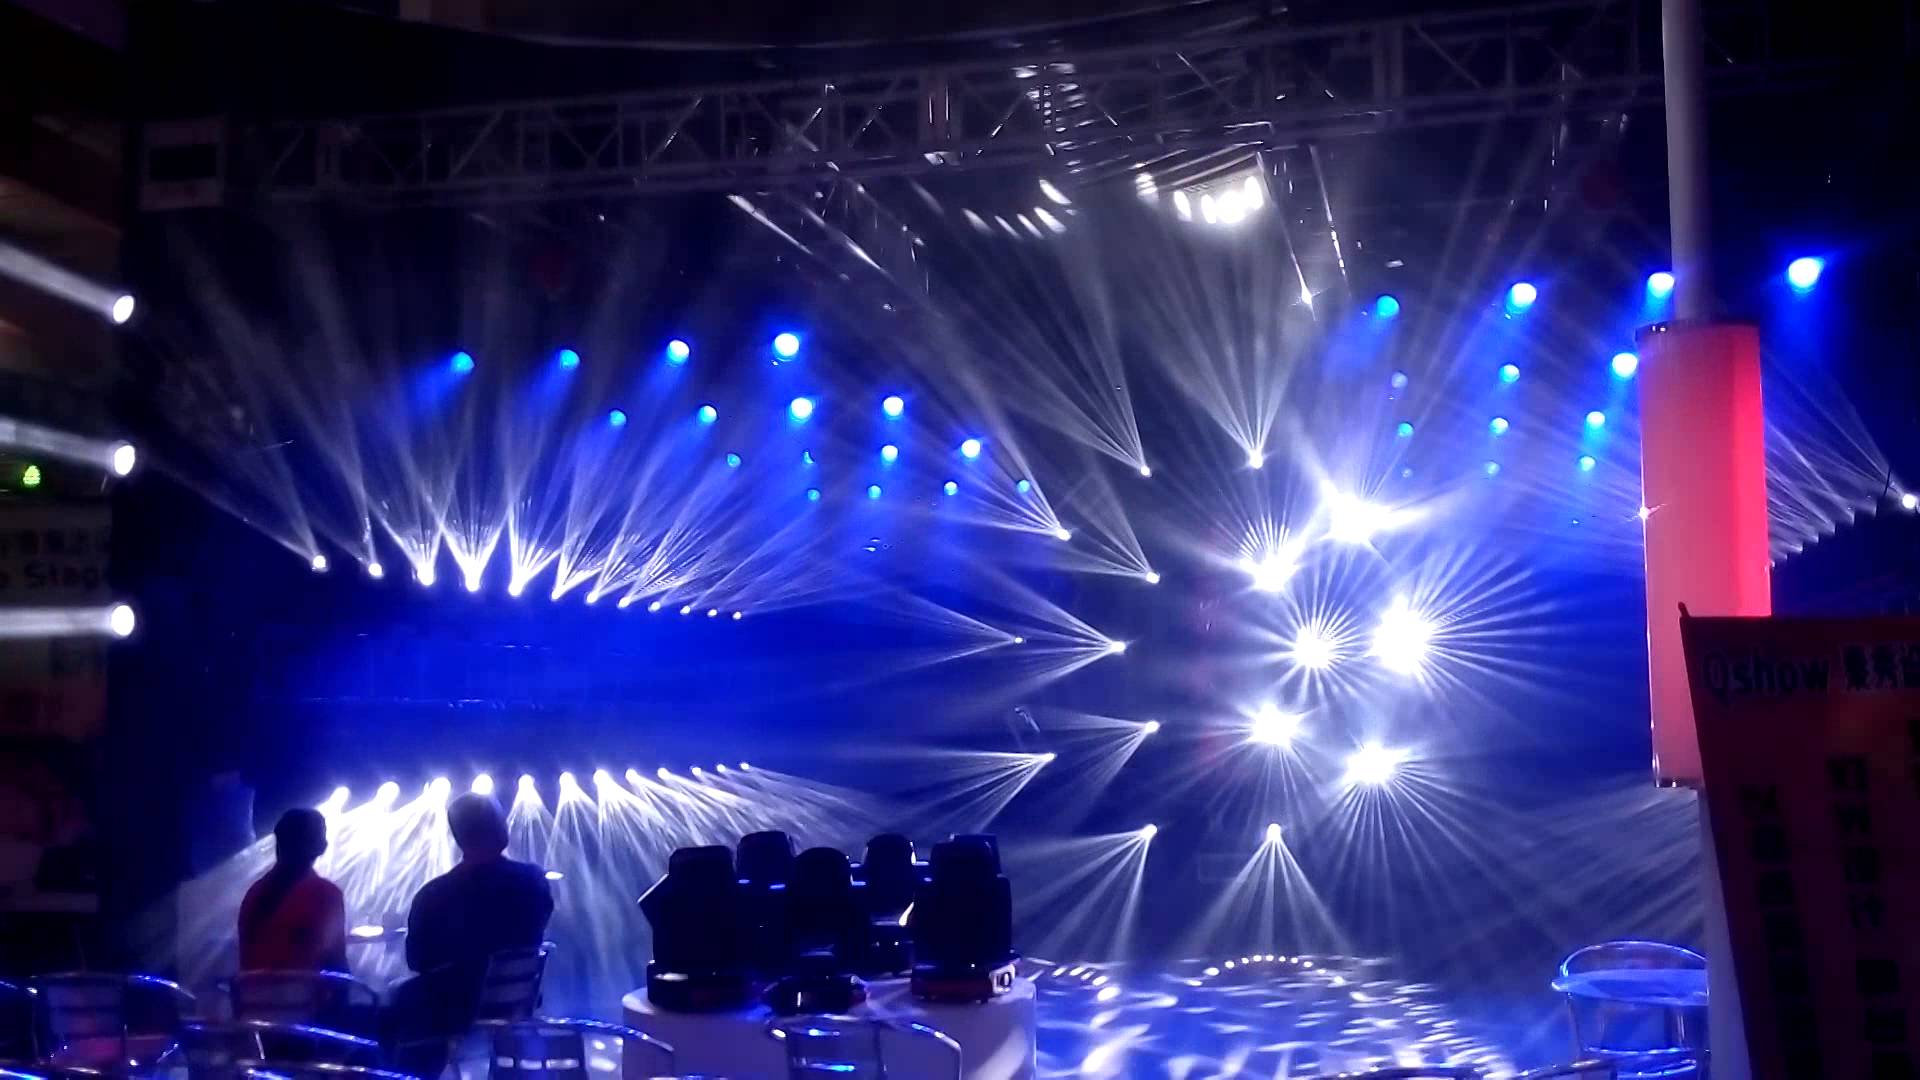 Awesome stage lights effects AD-3320 Optimus Prime 330w 15R beam ...